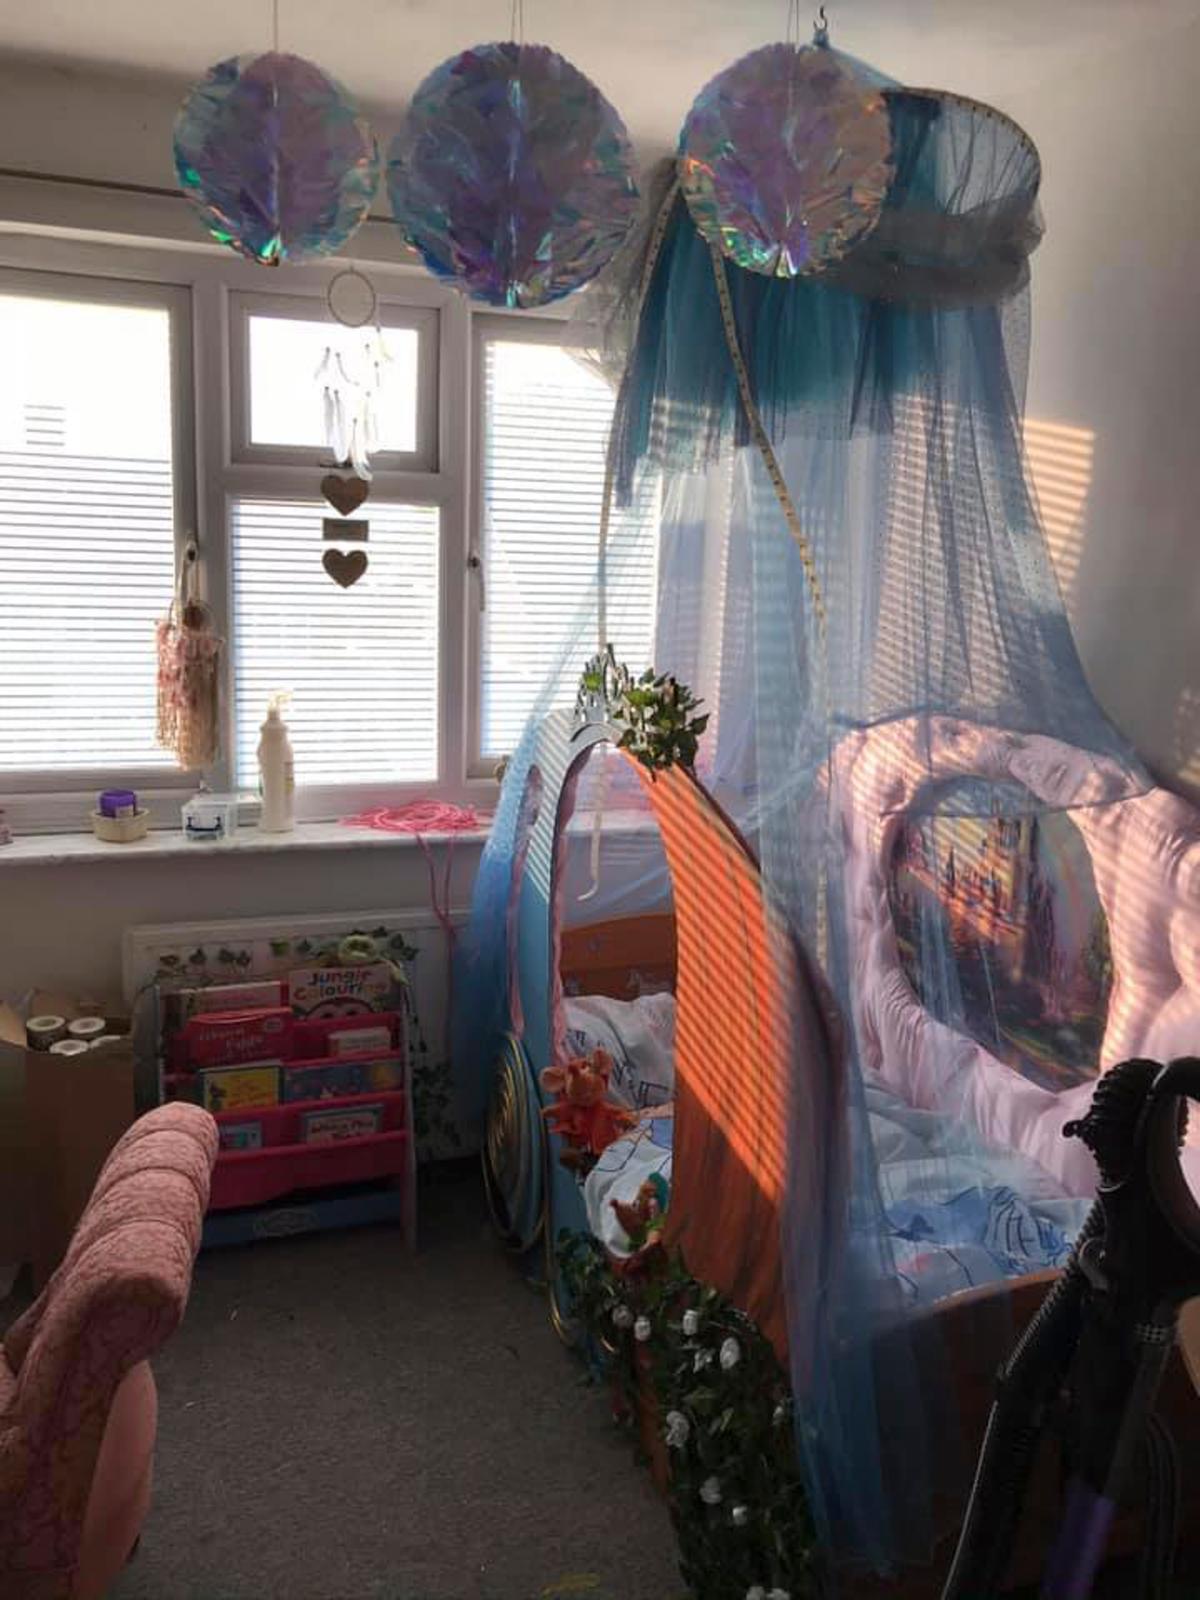 Ellie Mae's room after the transformation. (Caters News)